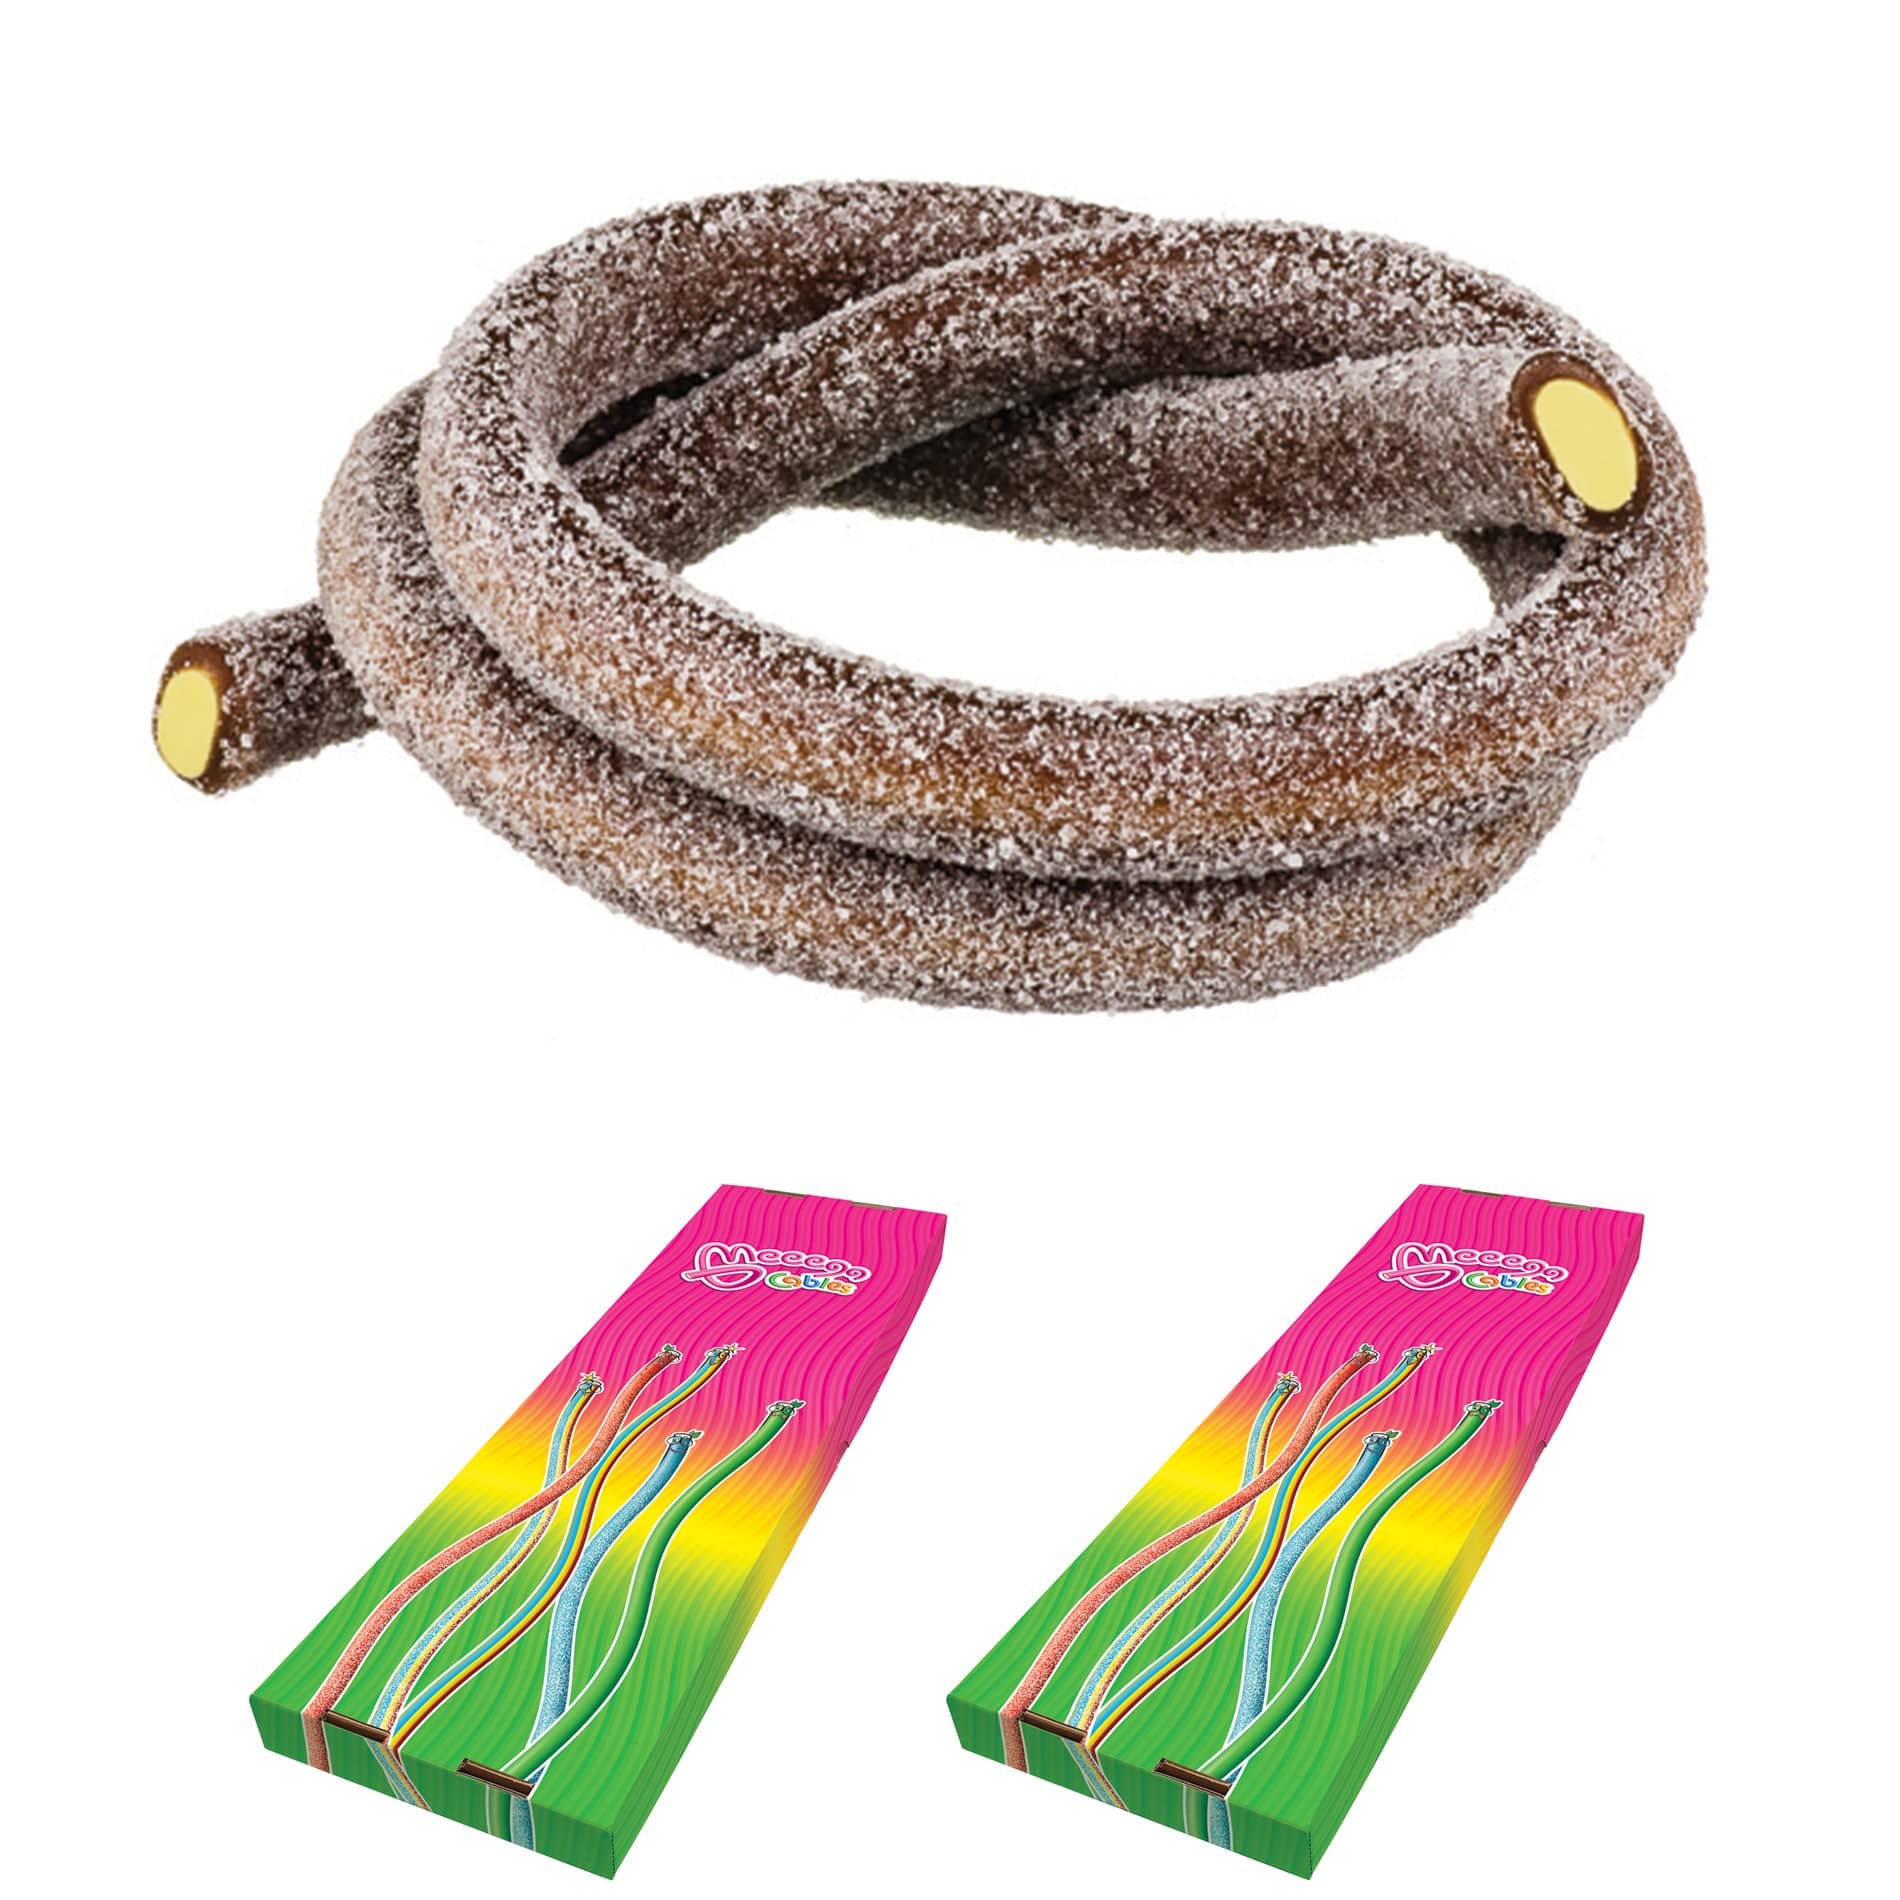 Novelty Concessions Gummy Rope SOUR COLA / 2 Pack (60 pieces) Meeega Cables European Chewy Rope Candy - Box of 30 individually wrapped Meeega Cables, each over 2-feet long cups with lids and straws